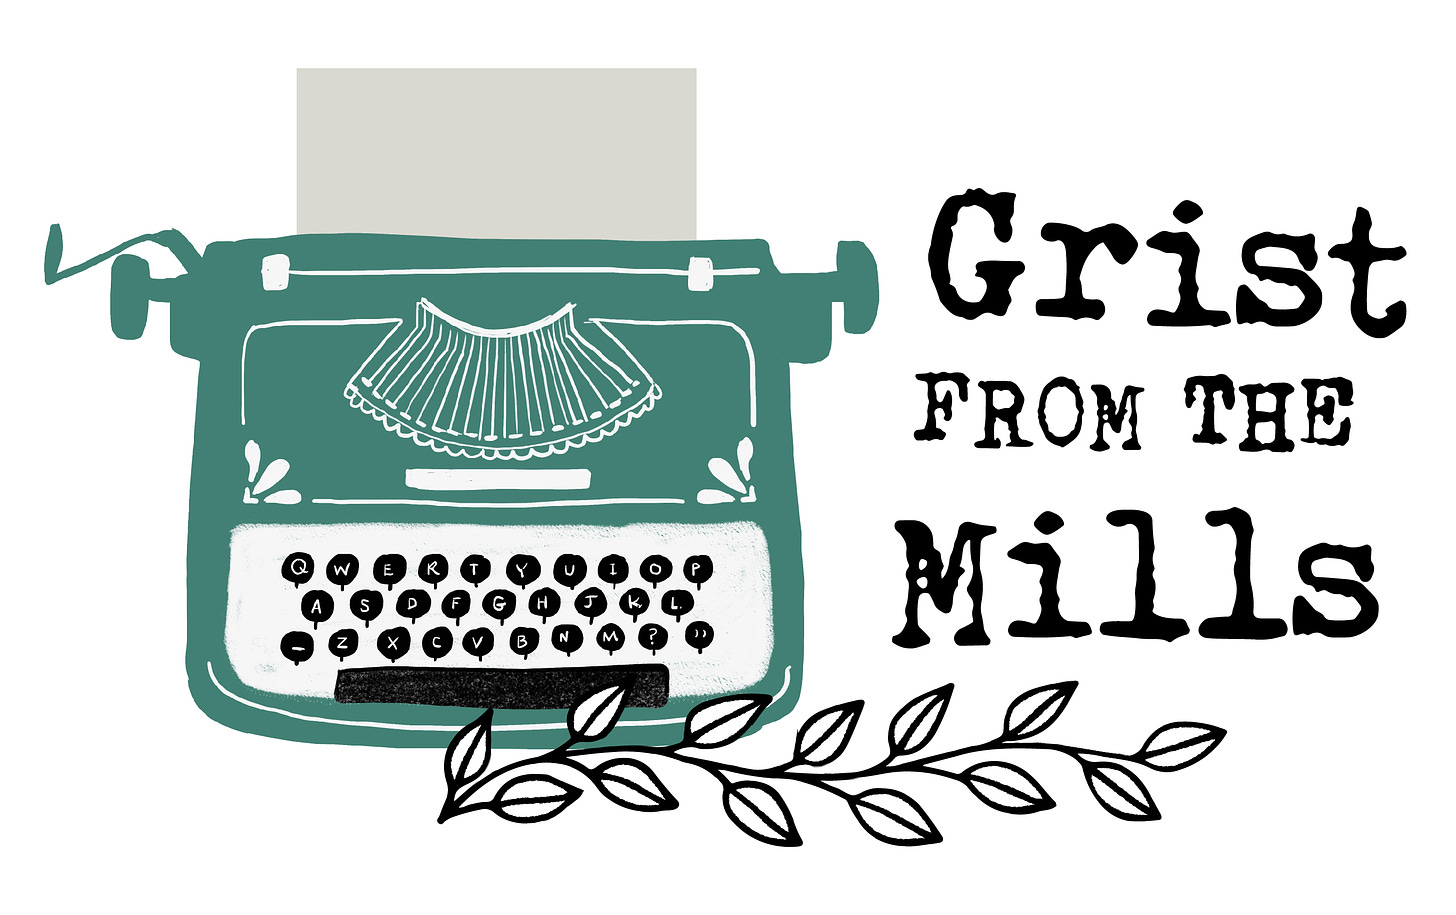 "Grist From the Mills" logo with image of typewriter and a branch with leaves